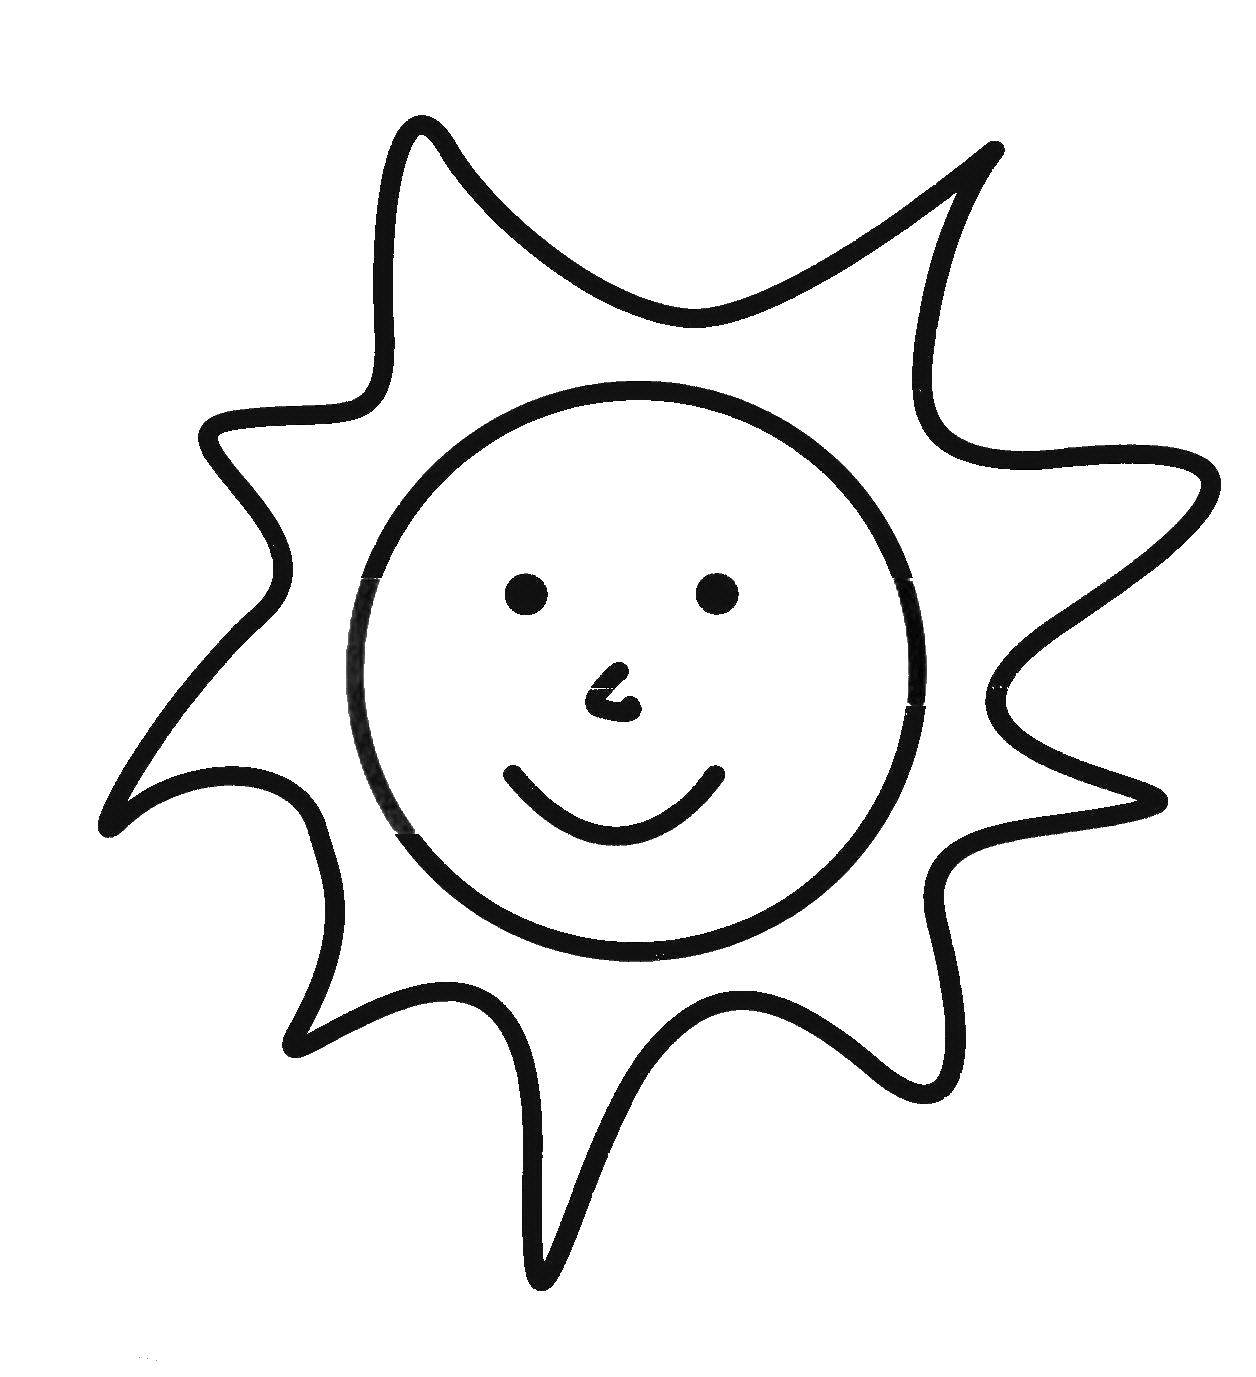 Coloring The sun. Category coloring for little ones. Tags:  the sun.